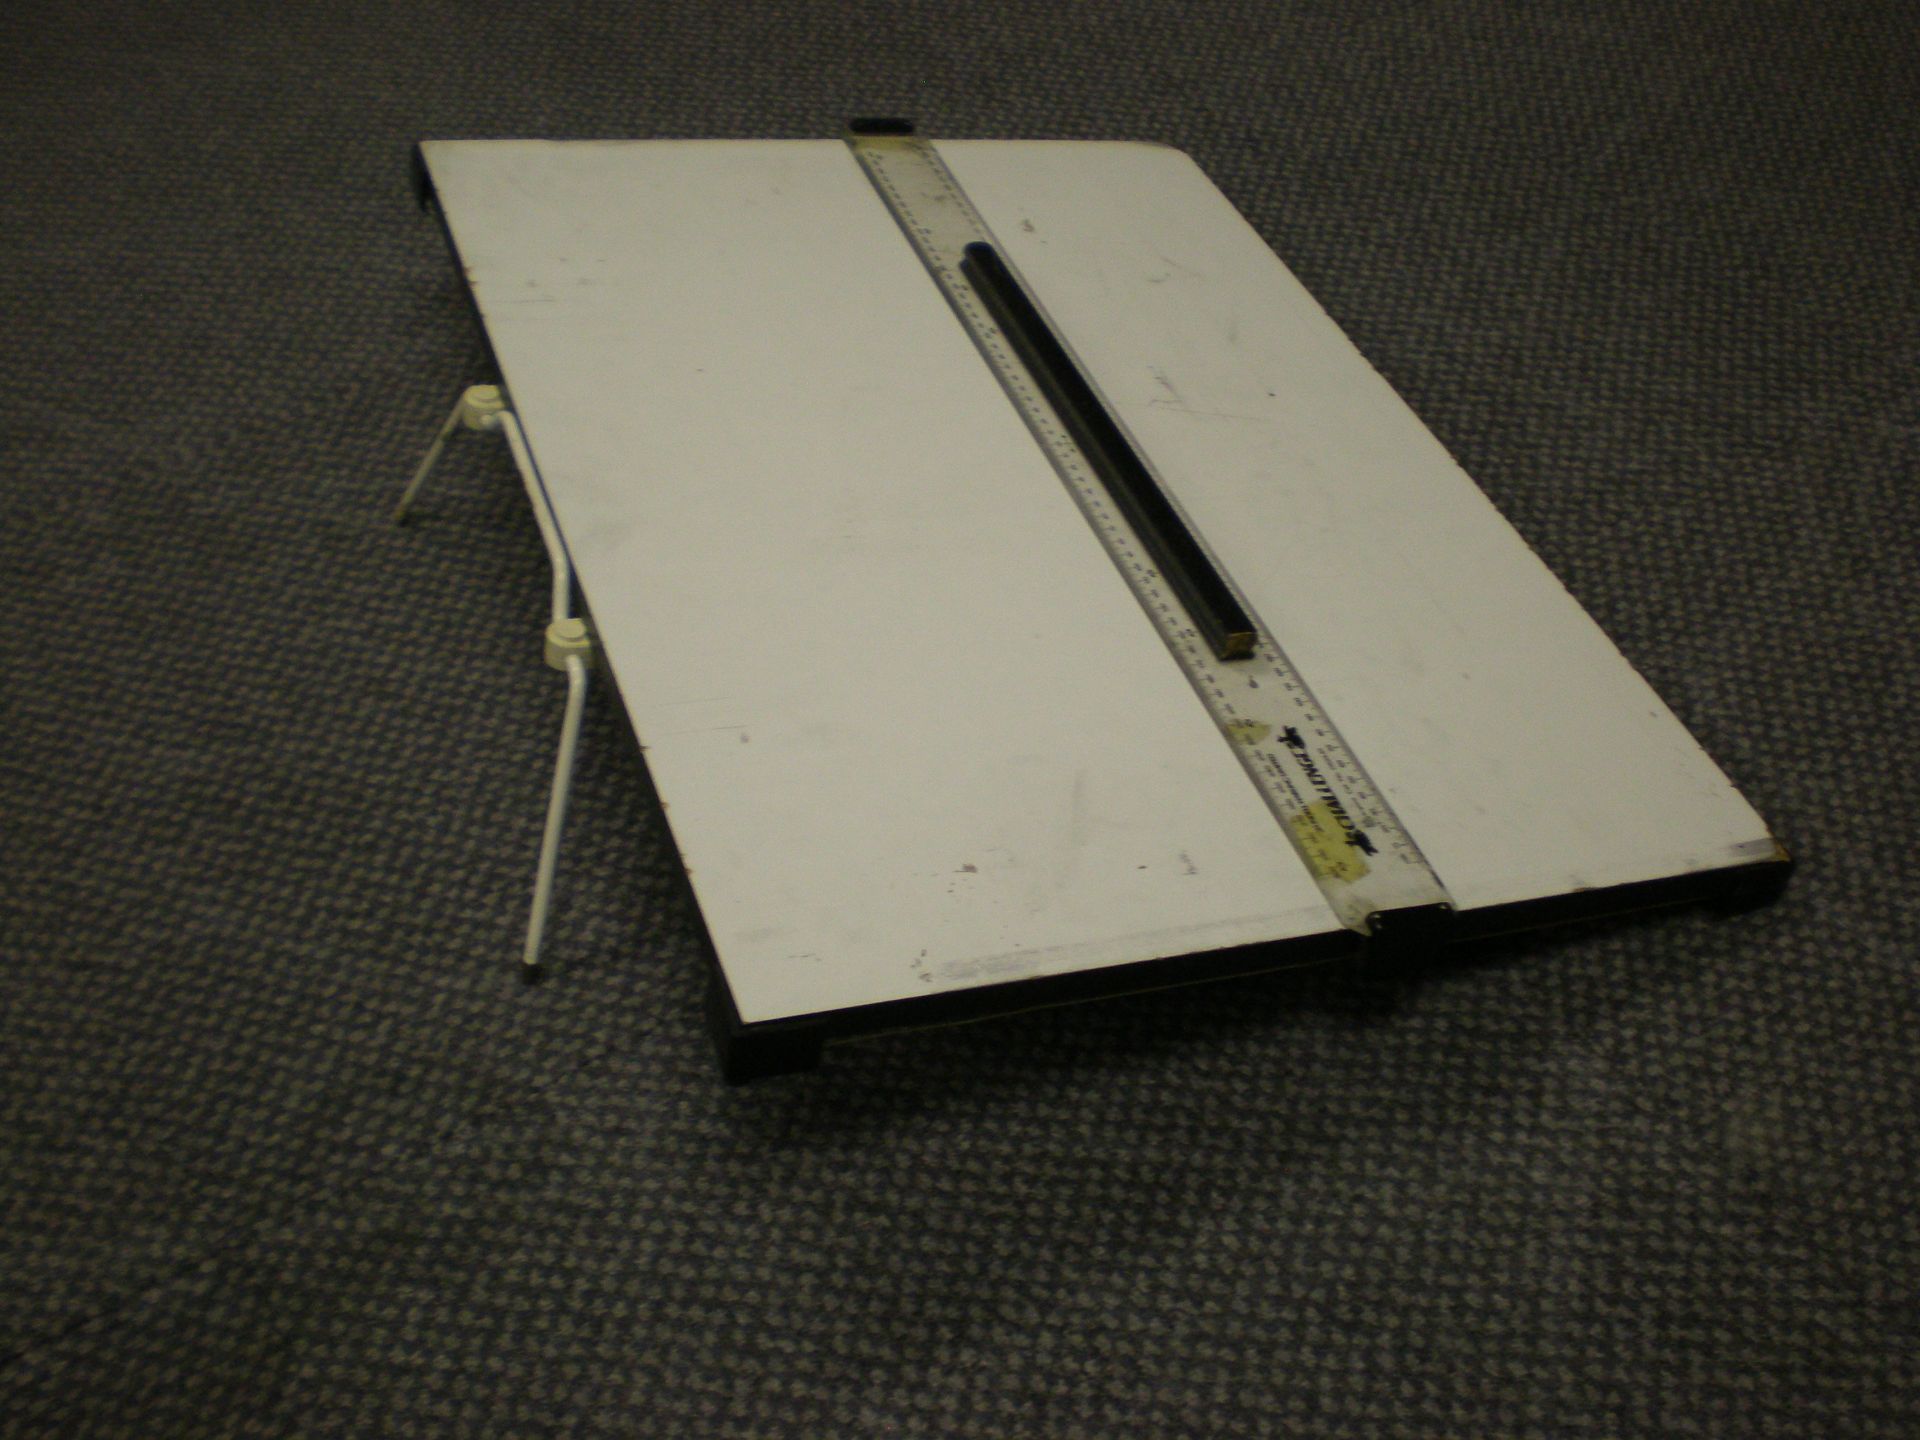 Set Of 23 Desktop Drawing Boards On Trolley With Wheels - Image 5 of 8